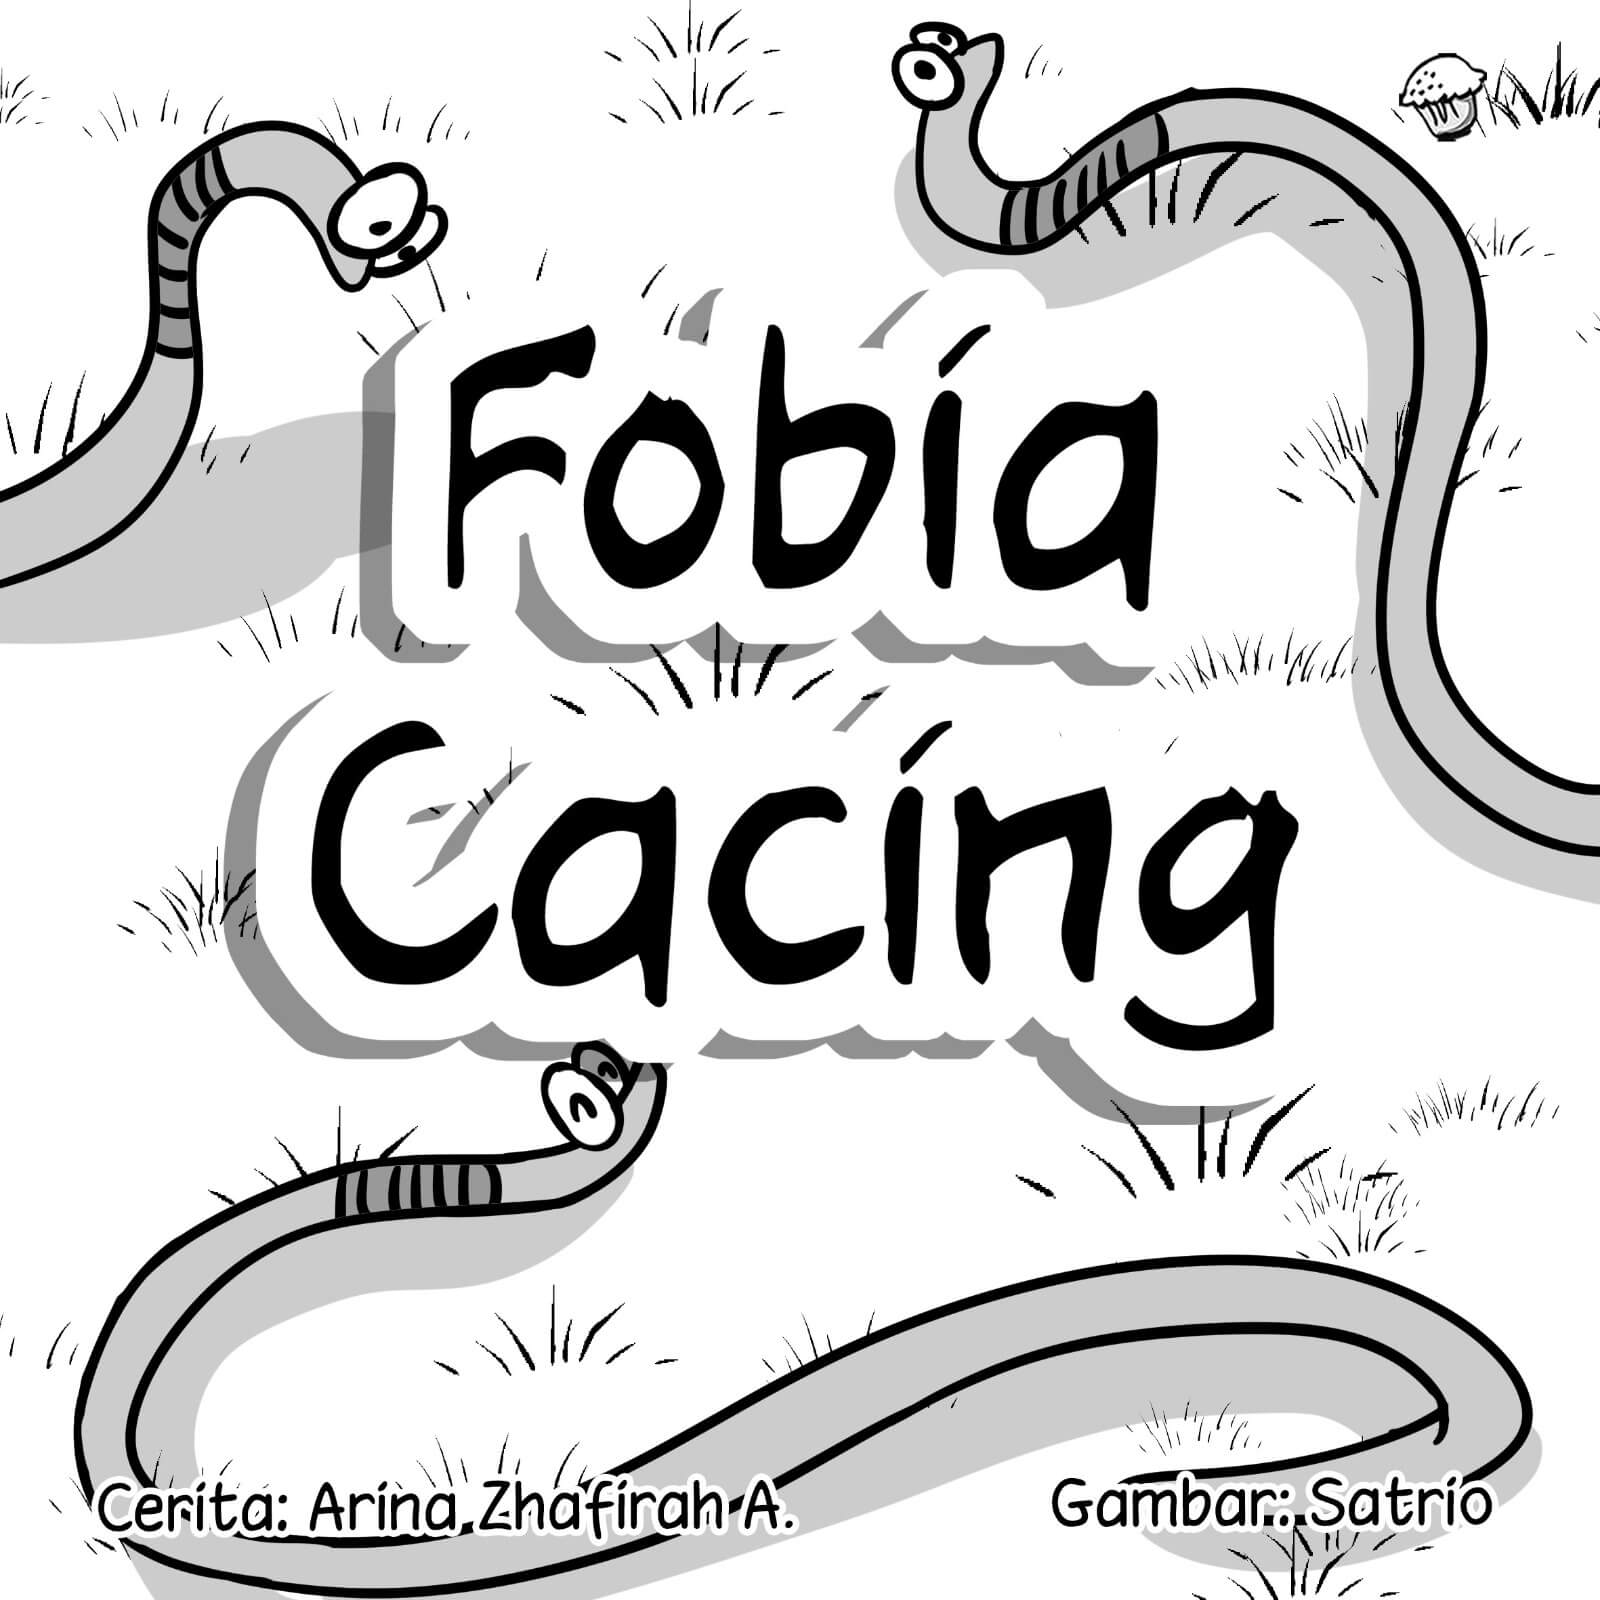 fobia cacing cover bw